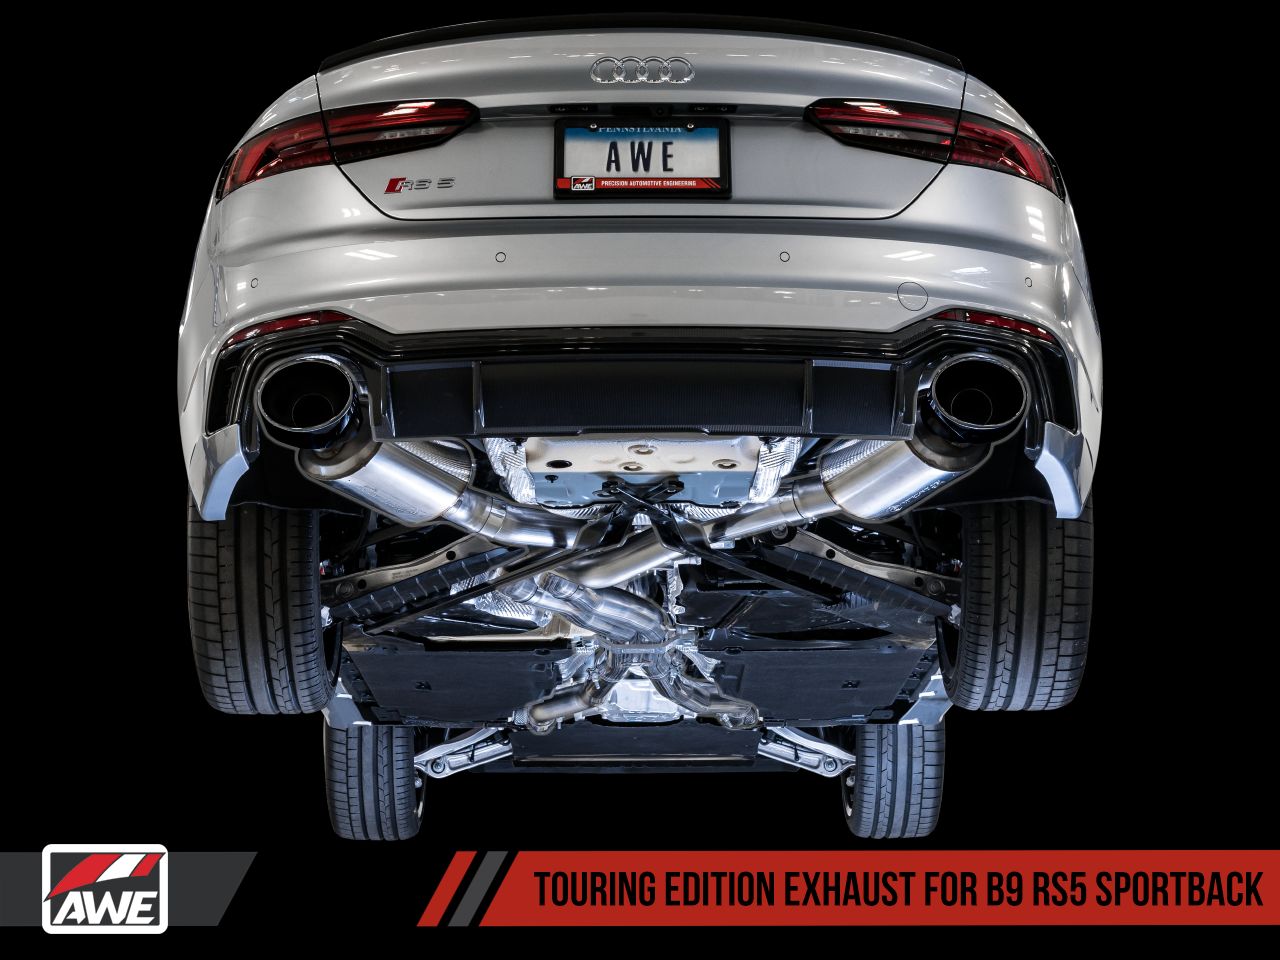 AWE Track Edition Exhaust for Audi B9 RS 5 Sportback - Non-Resonated - Diamond Black RS-style Tips - Motorsports LA